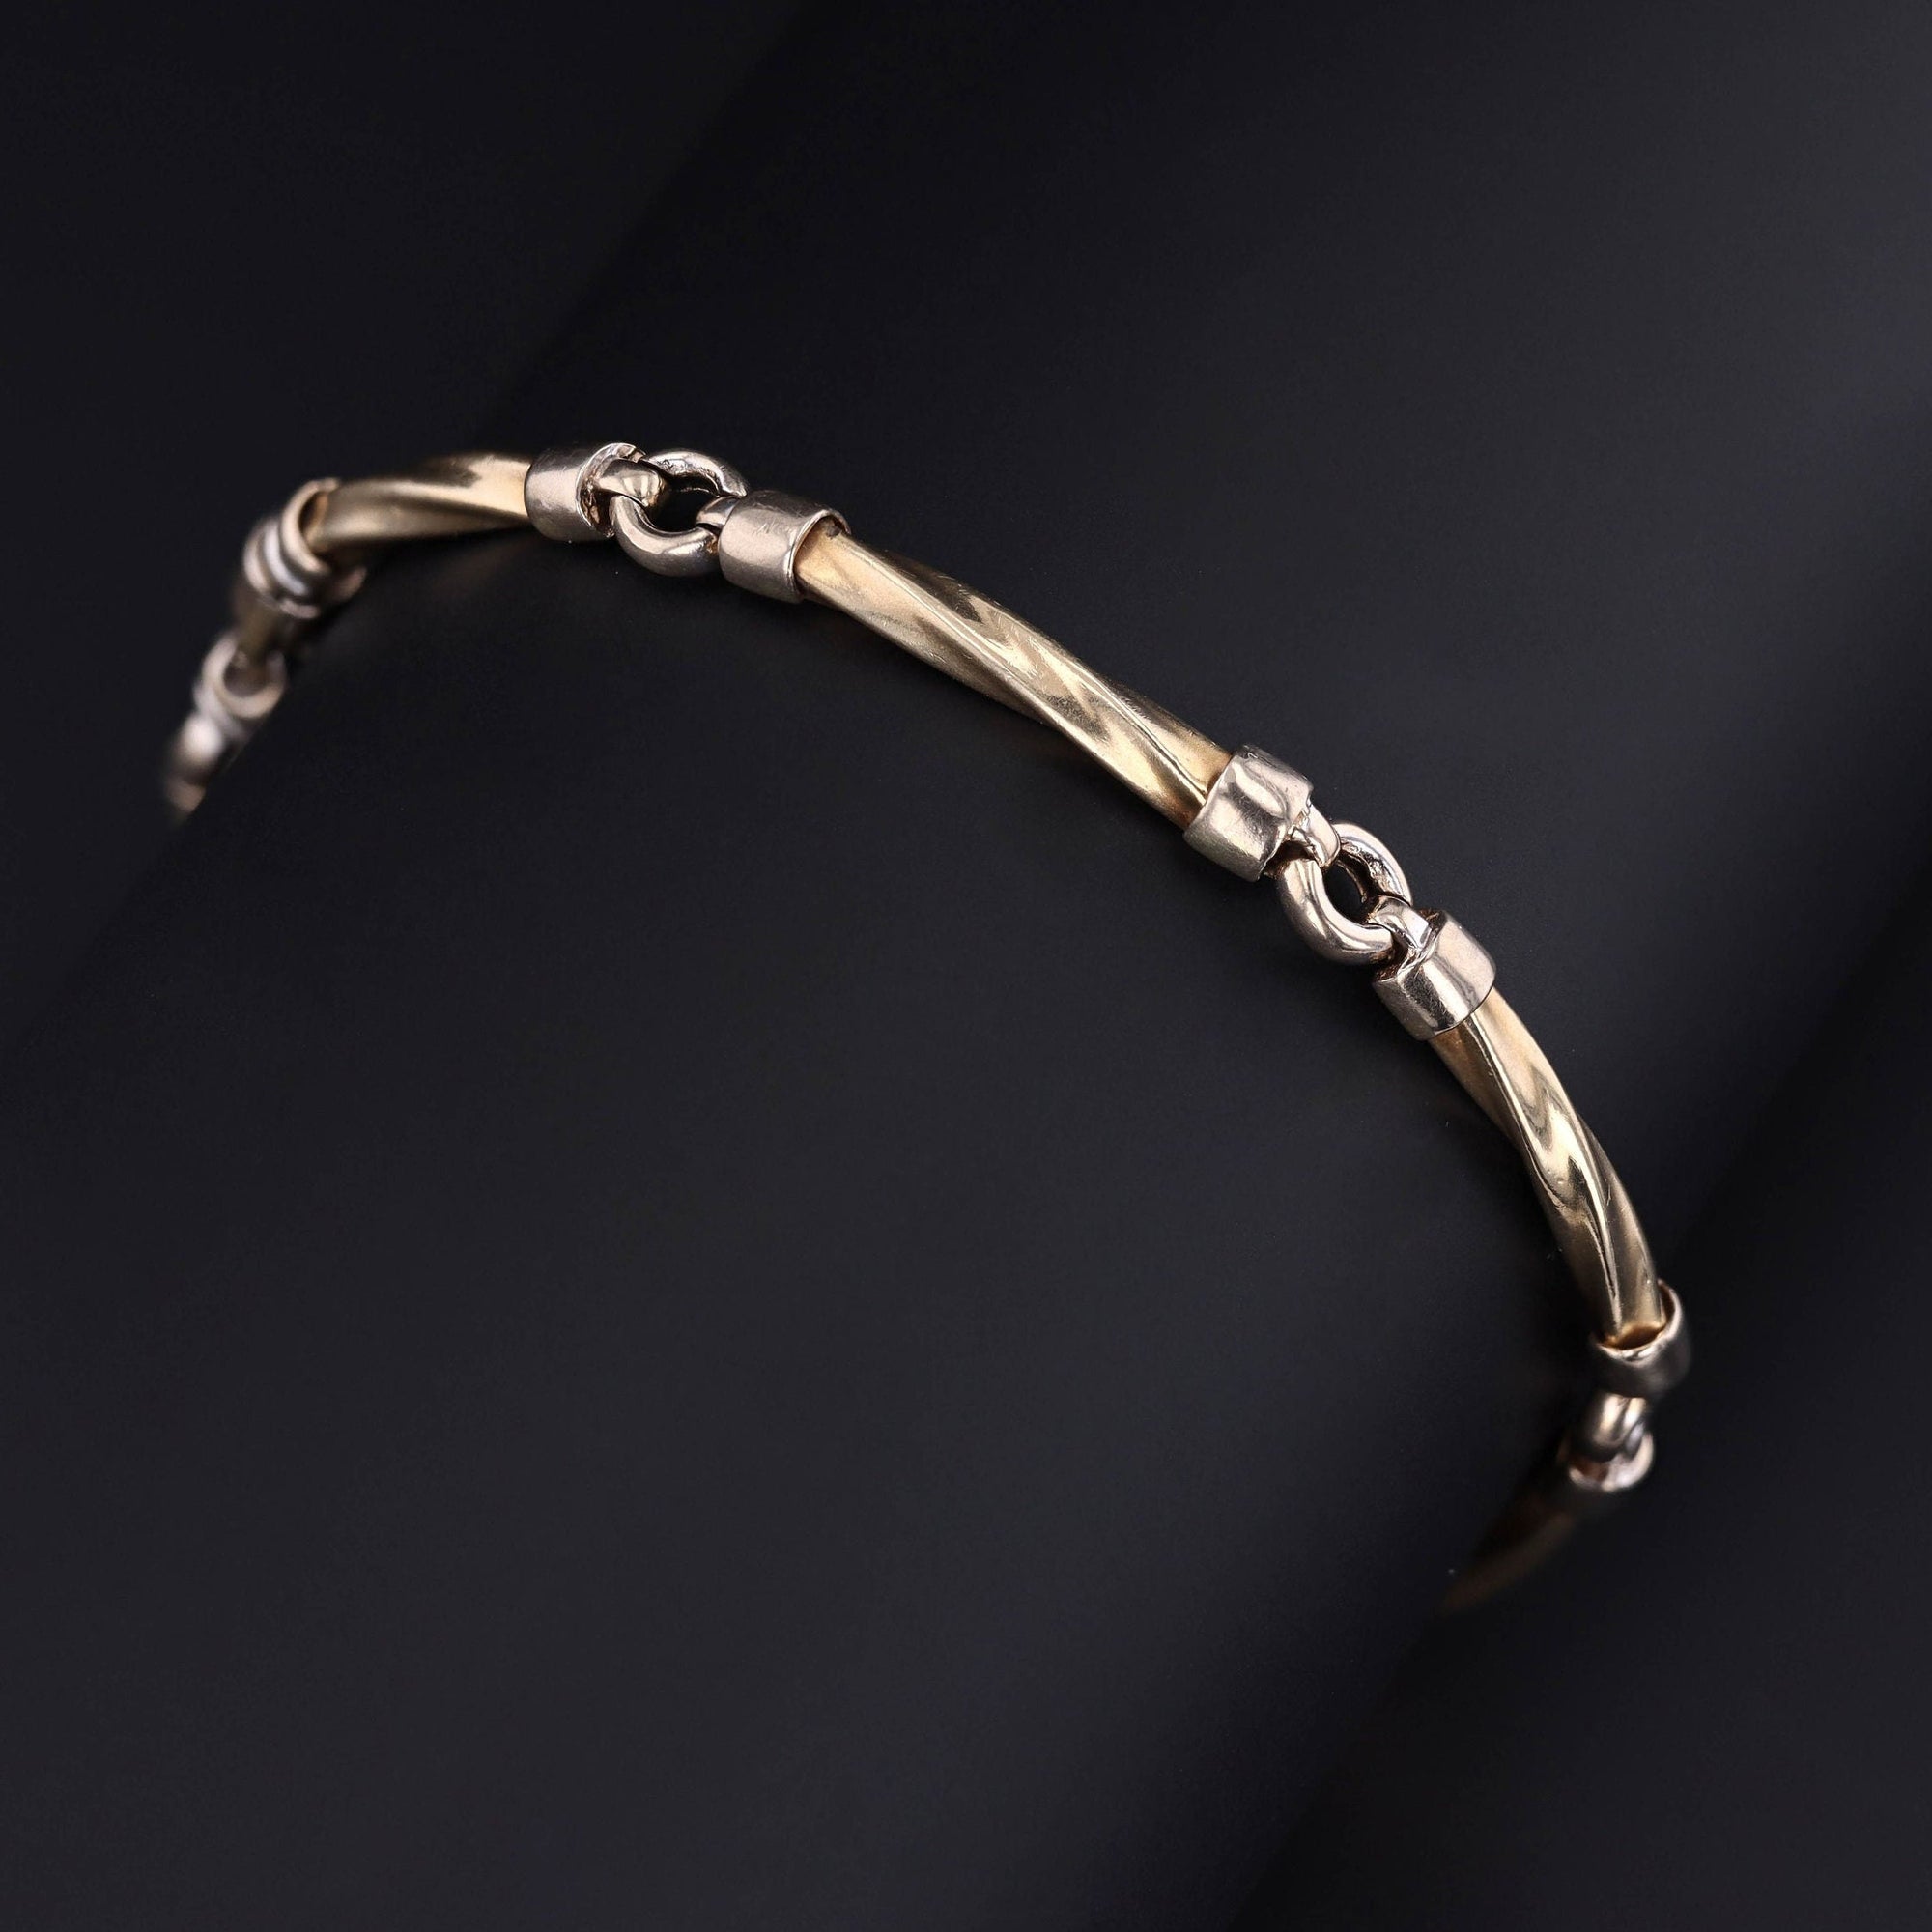 Vintage Link Bracelet of 14k Yellow and White Gold